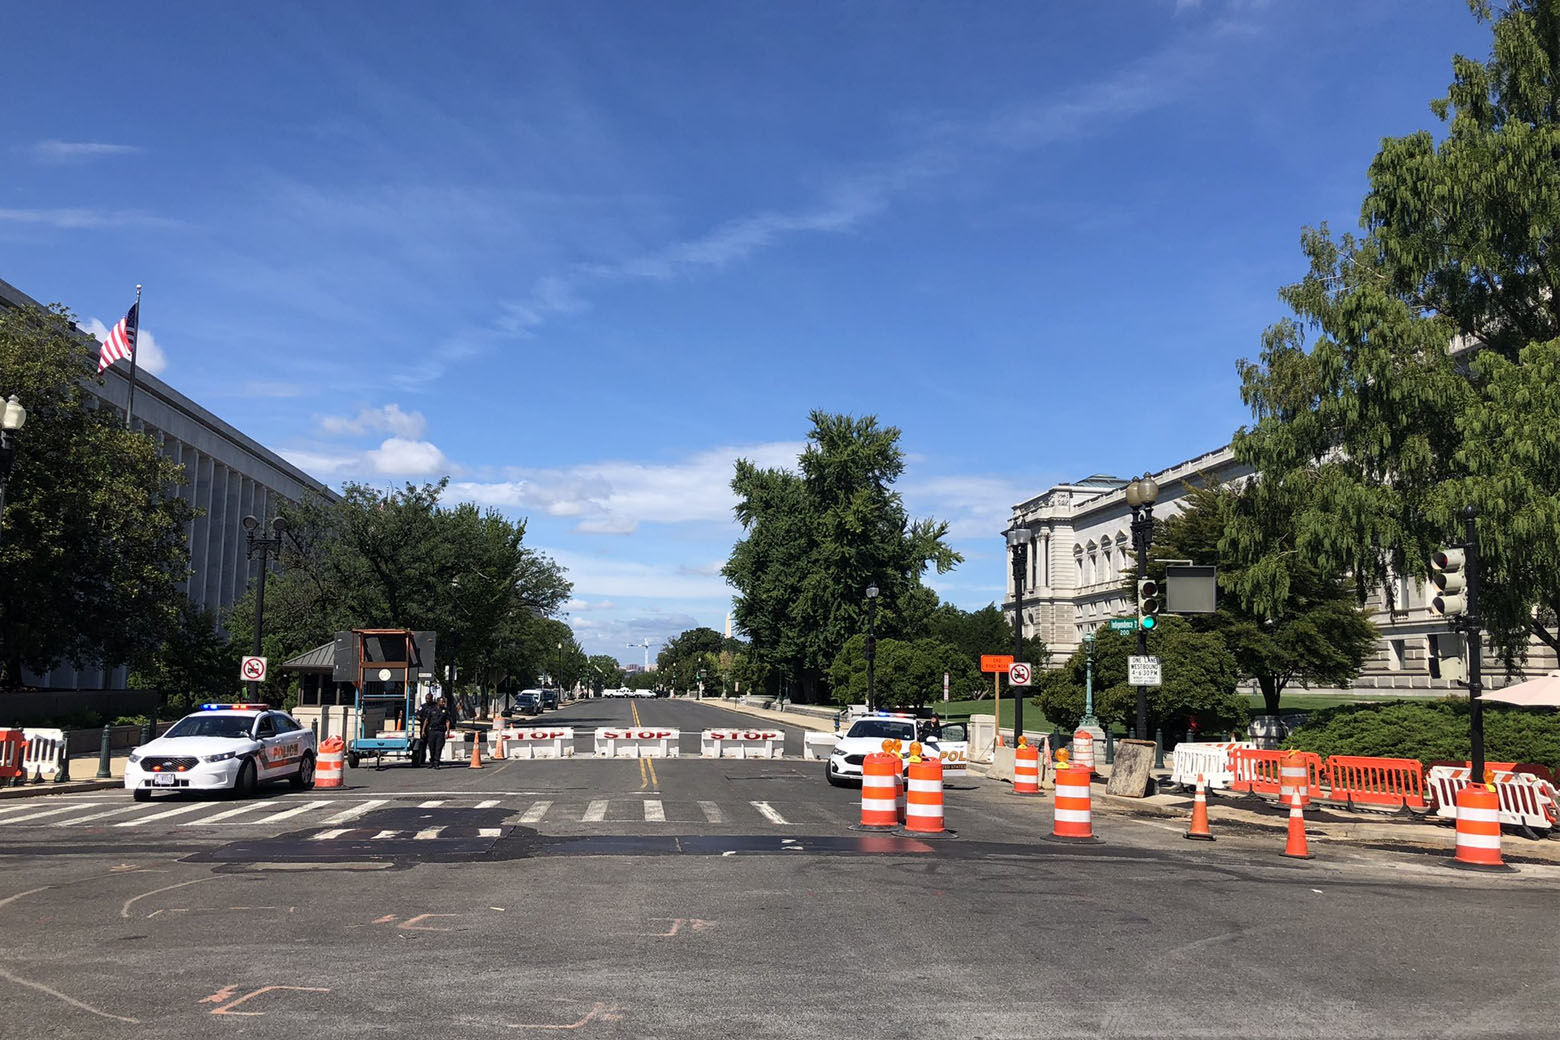 Police blocked off Independence Avenue near the Library of Congress as they investigate a possible bomb threat. (WTOP/Mitchell Miller)